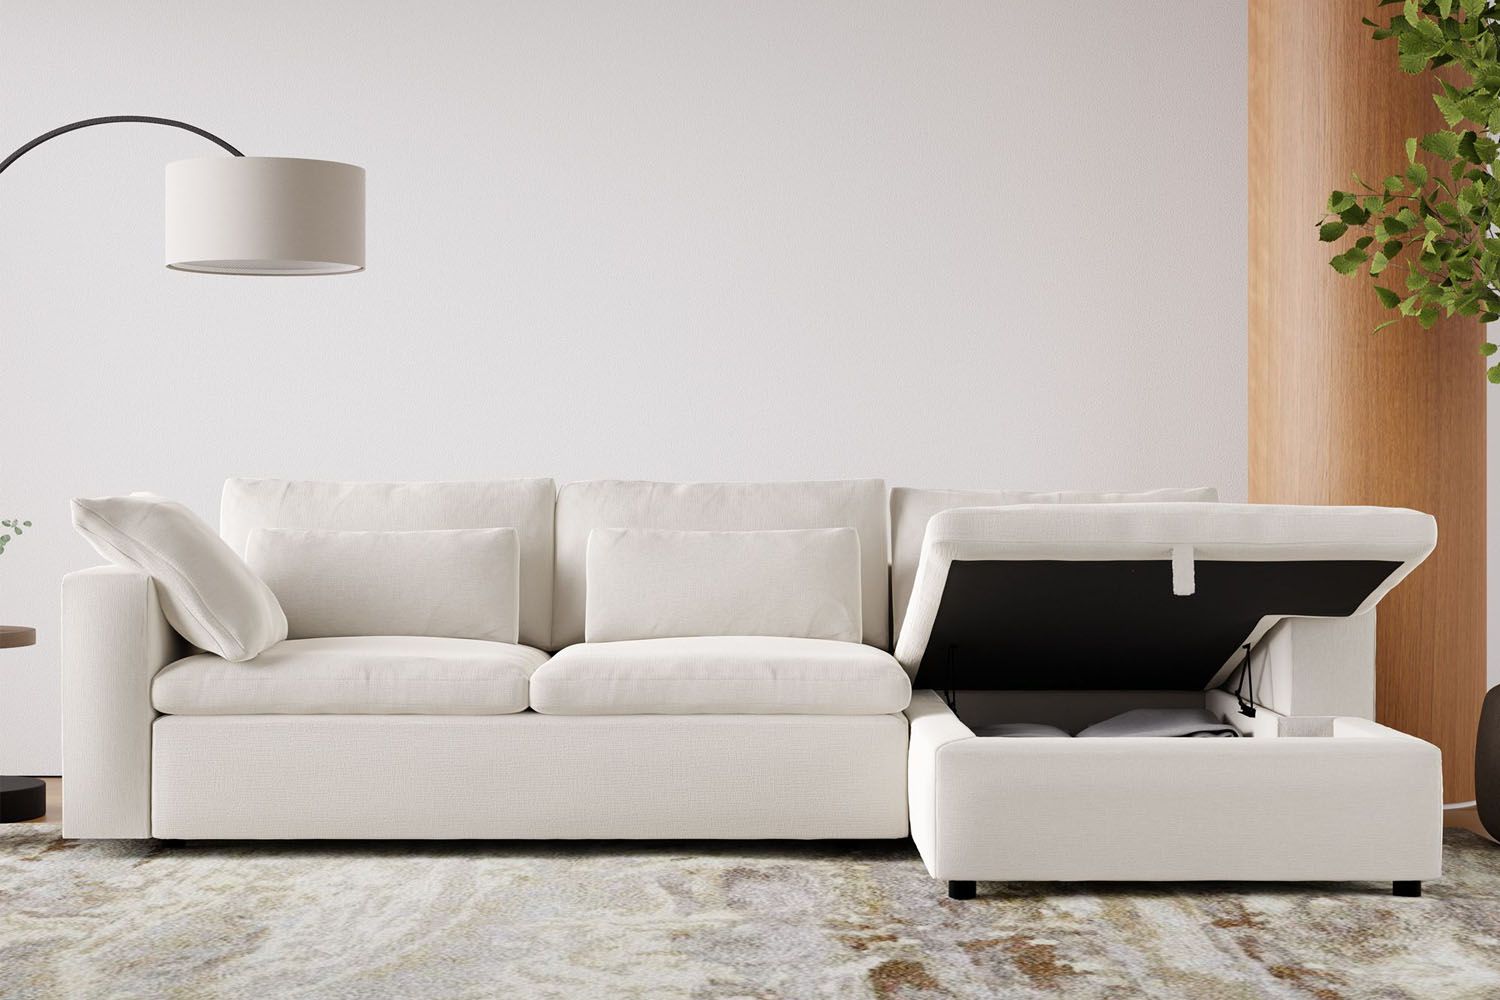 Sectional Sofas With Storage For Families: 10 Easy Pieces Regarding Sectional Sofa With Storage (View 12 of 15)